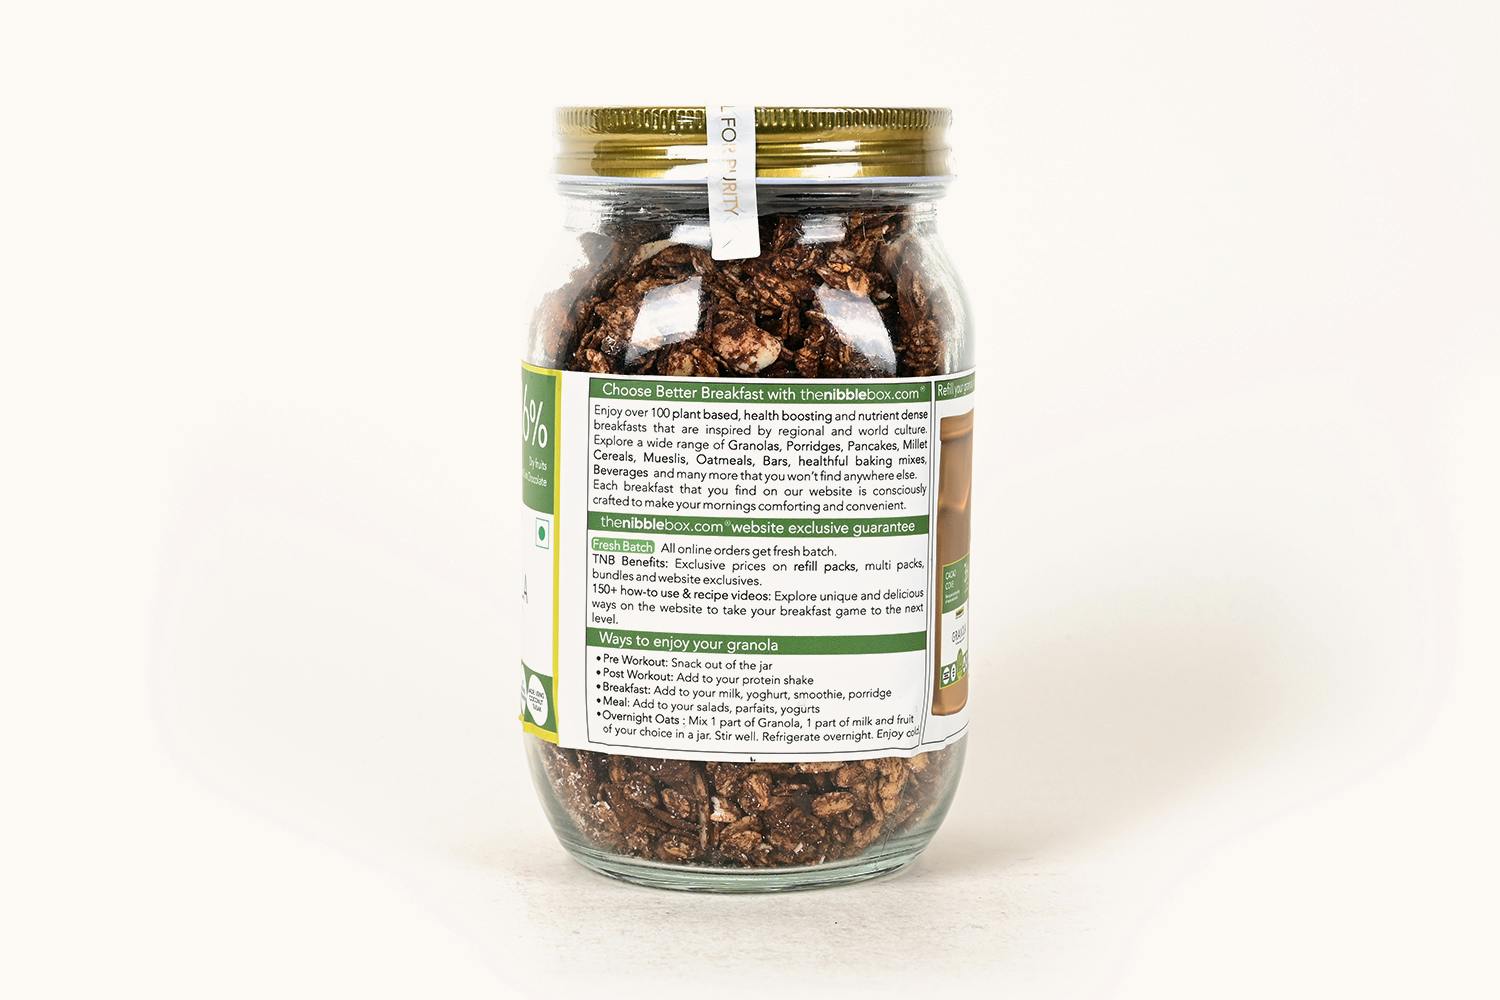 /t/n/tnb-cacao-cove-granola-jr-500g-2_9f07gqwrby21mmty.jpg